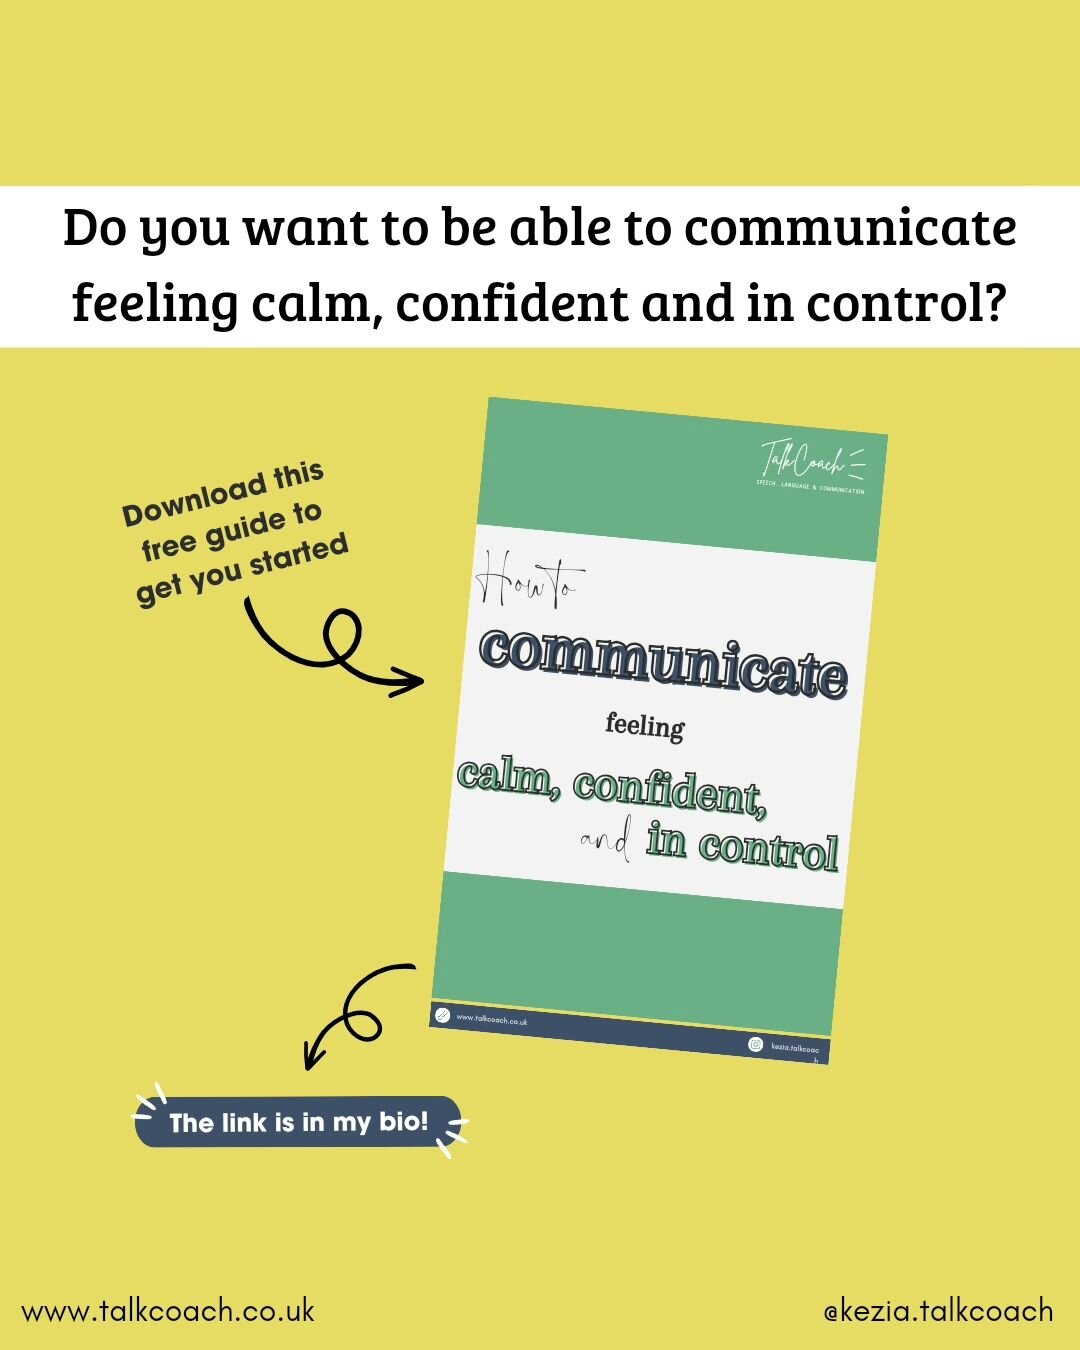 My free guide is jam-packed with helpful tips to help you communicate feeling calm, confident and in control ✨

Check the link in my bio or drop me a DM if you want a copy!

#communicationcoaching #communicationcoach #socialanxiety #confidentcommunic